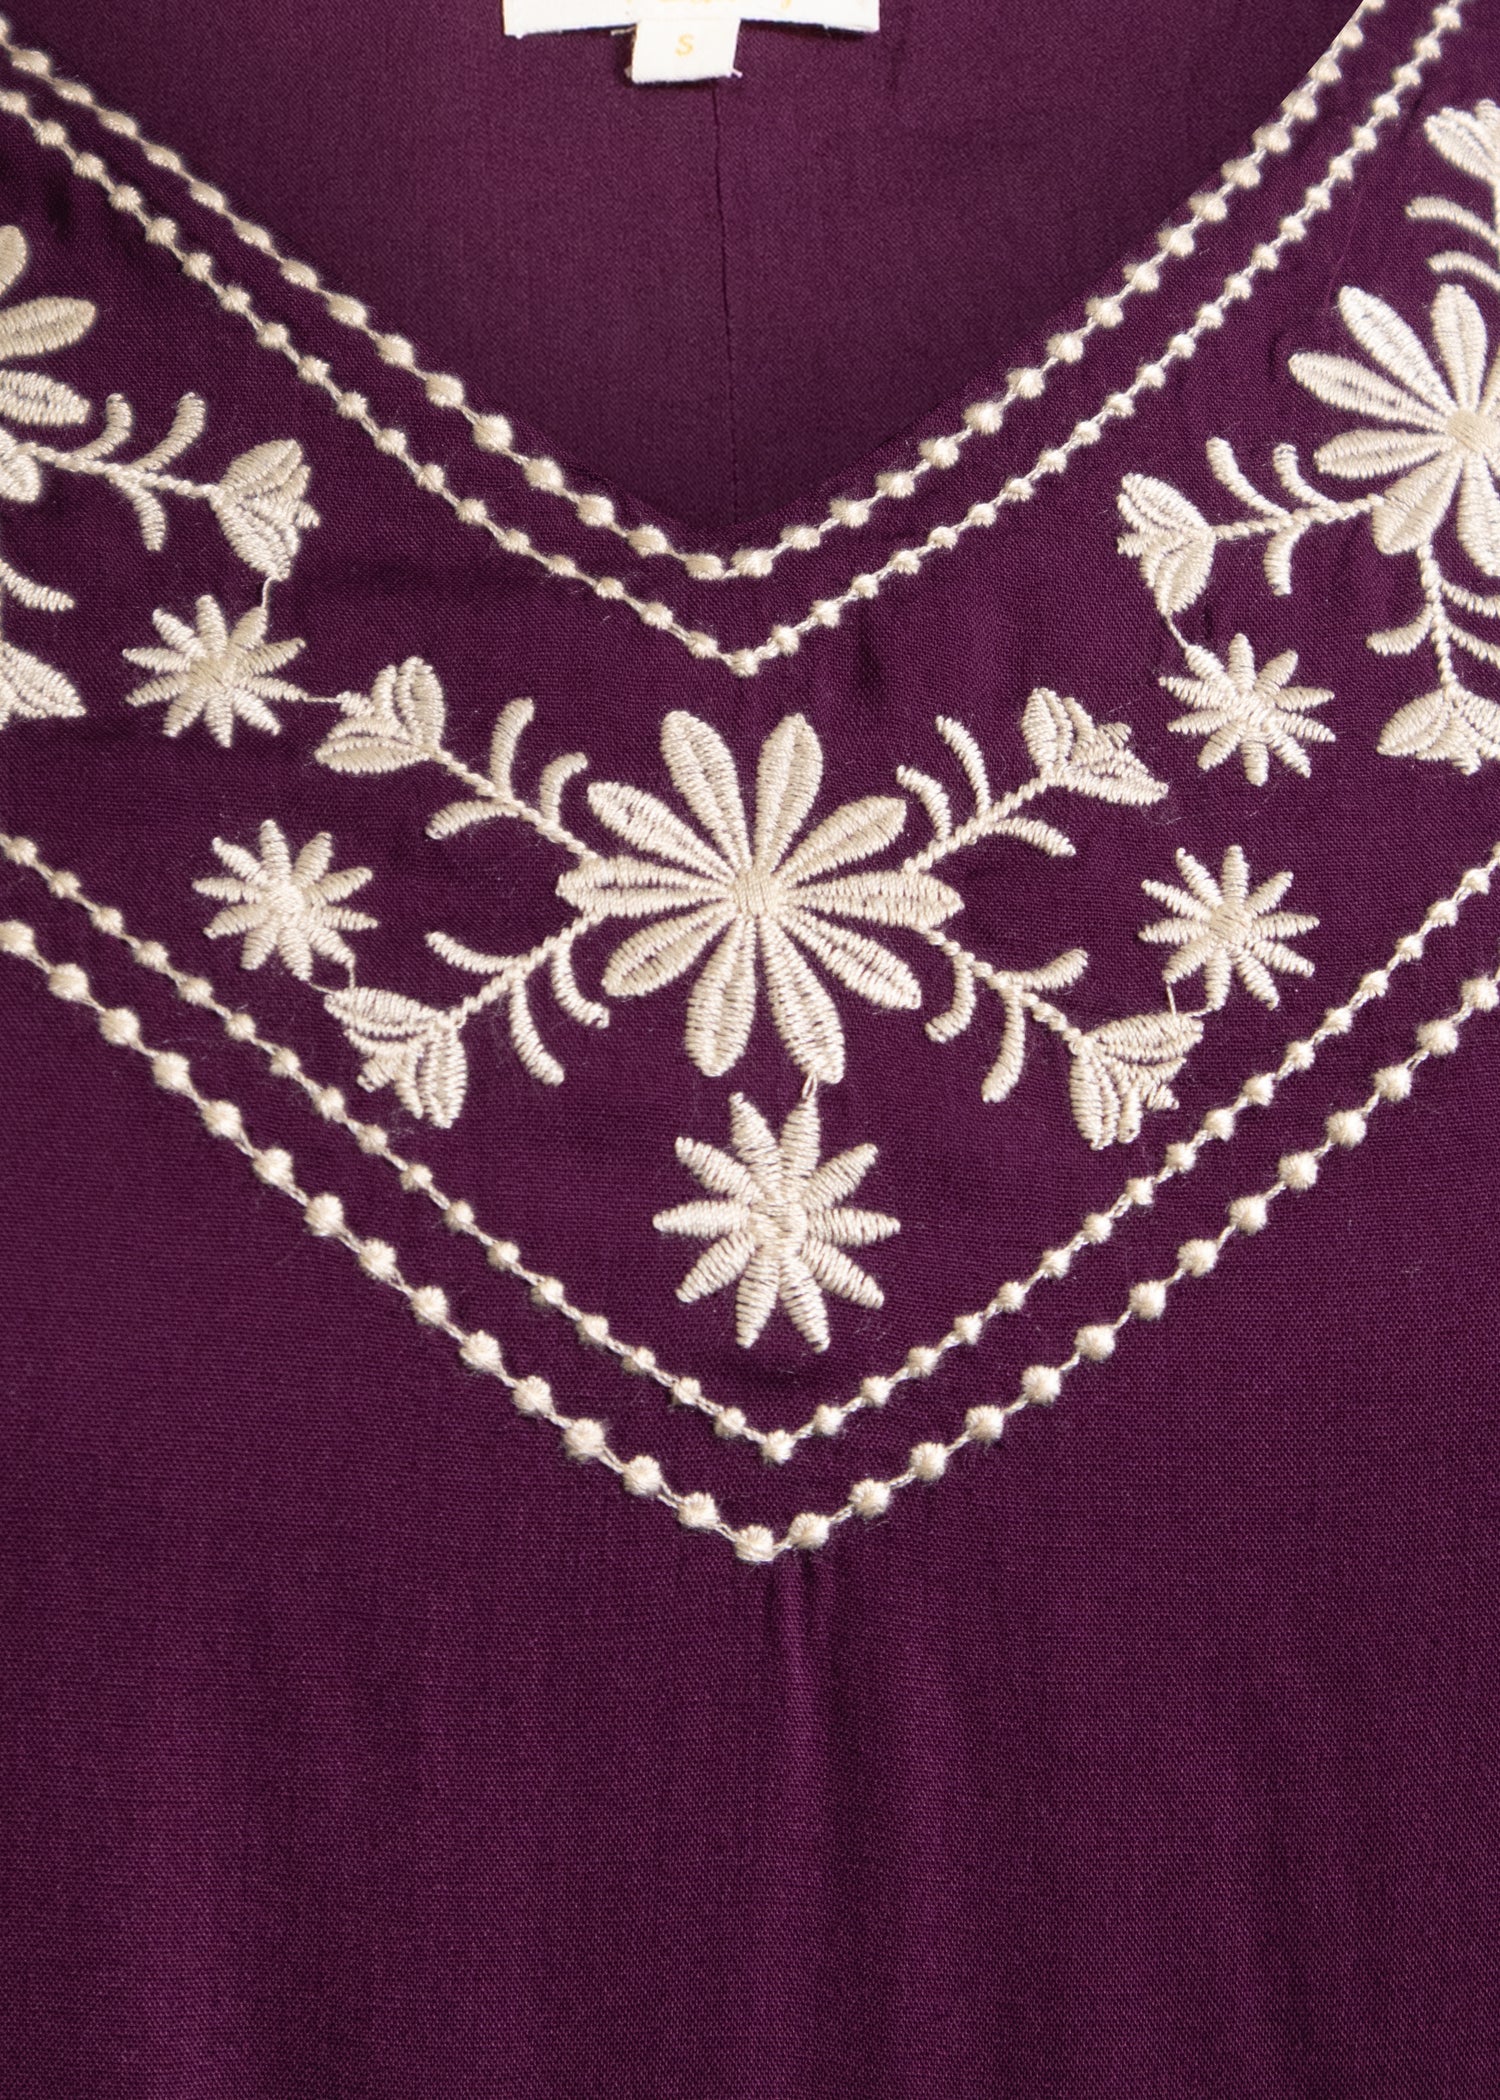 Maroon Dress with Cream Embroidery